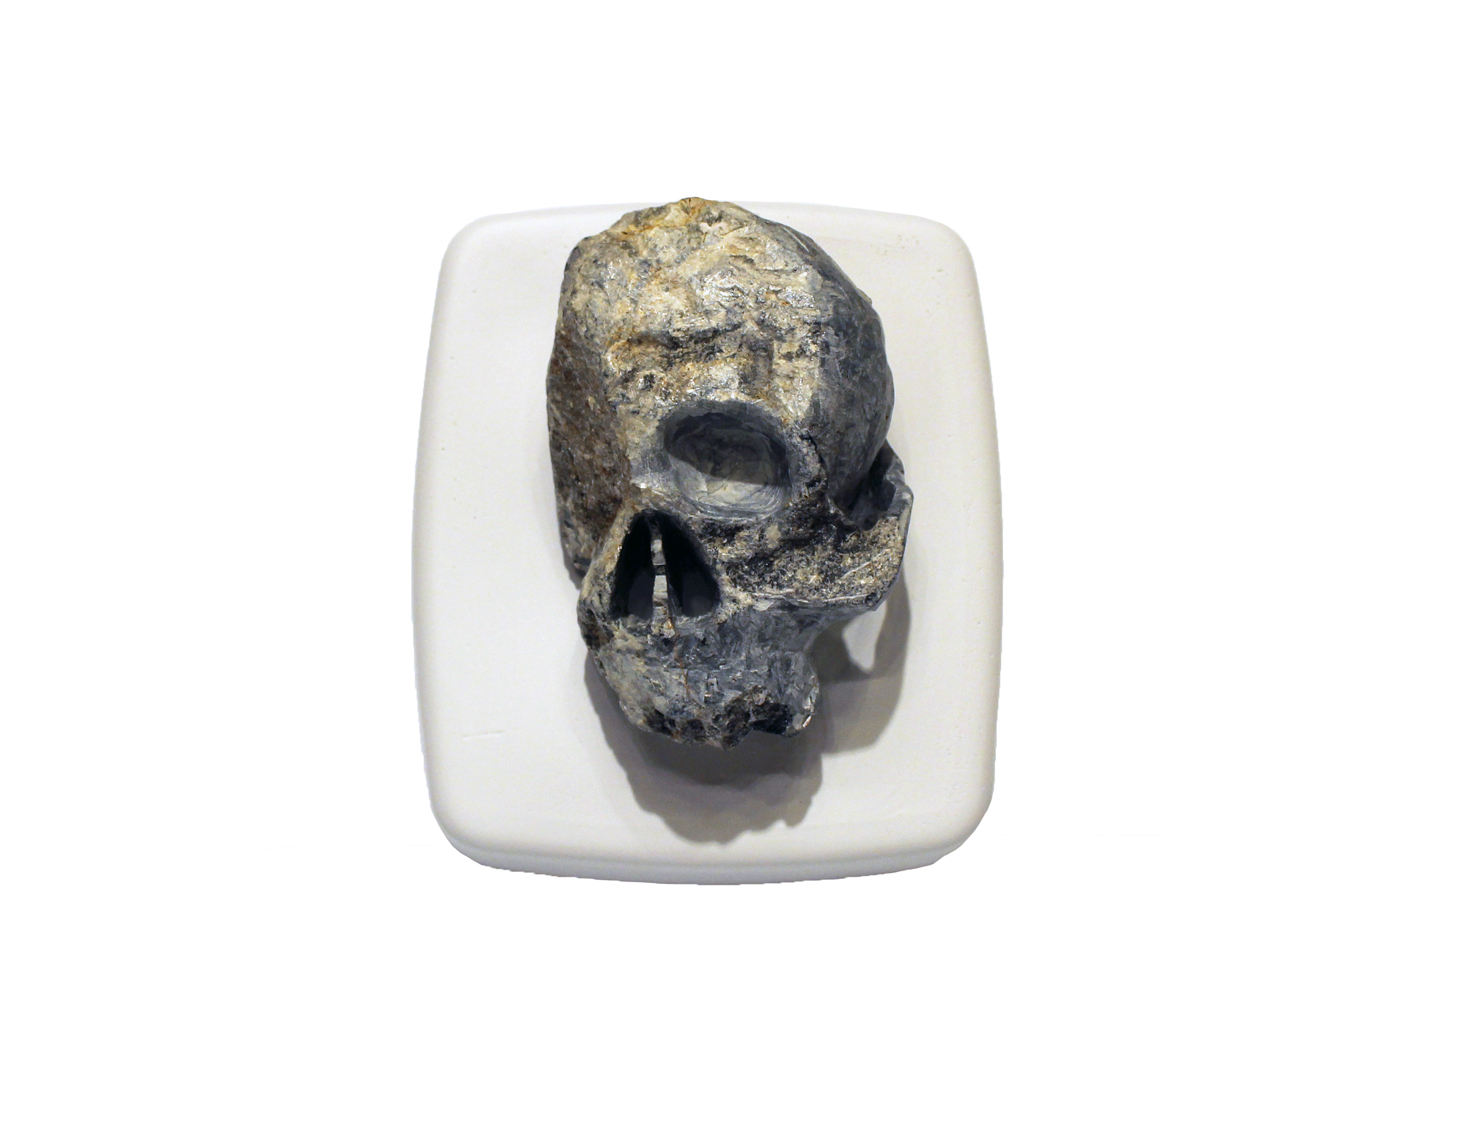 SeatoSkyMomentoMorieastskullmoquette_2014_alabaster_7.5x10x5_3x4x2_Available